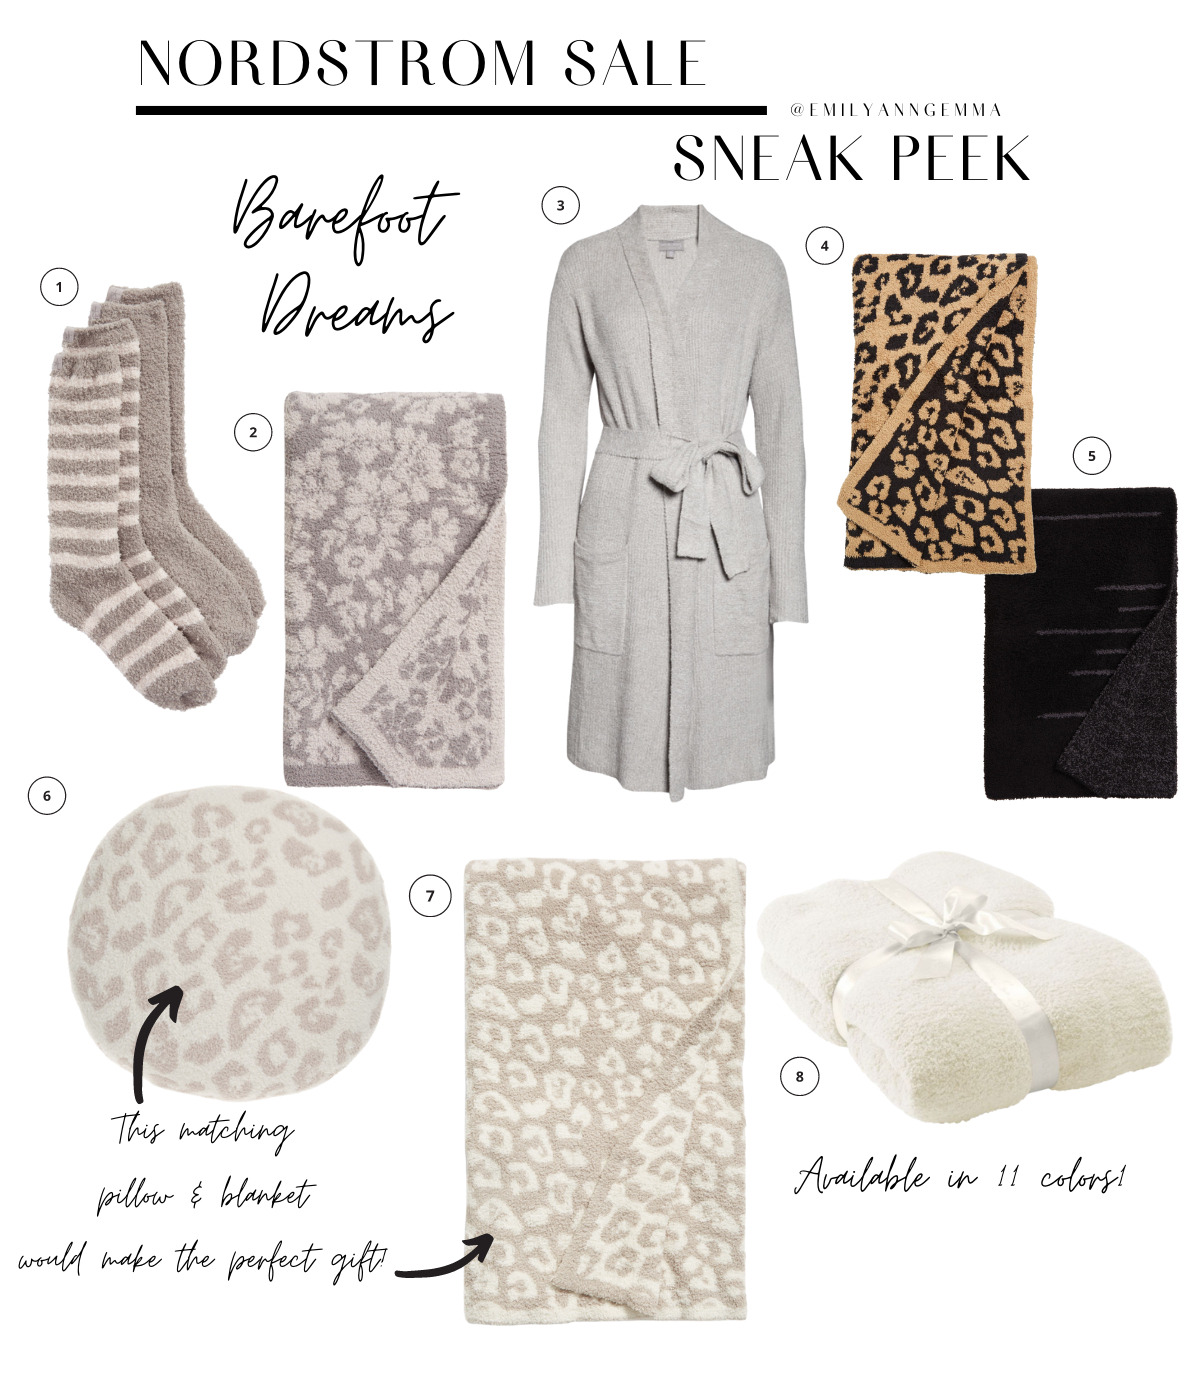 nsale 2021 barefoot dreams, nordstrom anniversary sale 2021 blog posts, nsale preview 2021, emily ann gemma, the sweetest thing blog | Nordstrom Anniversary Sale by popular US fashion blog, The Sweetest Thing: image of various Nordstrom barefoot dreams blanket, Nordstrom Barefoot Dreams Socks, and Nordstrom Barefoot dreams items. 